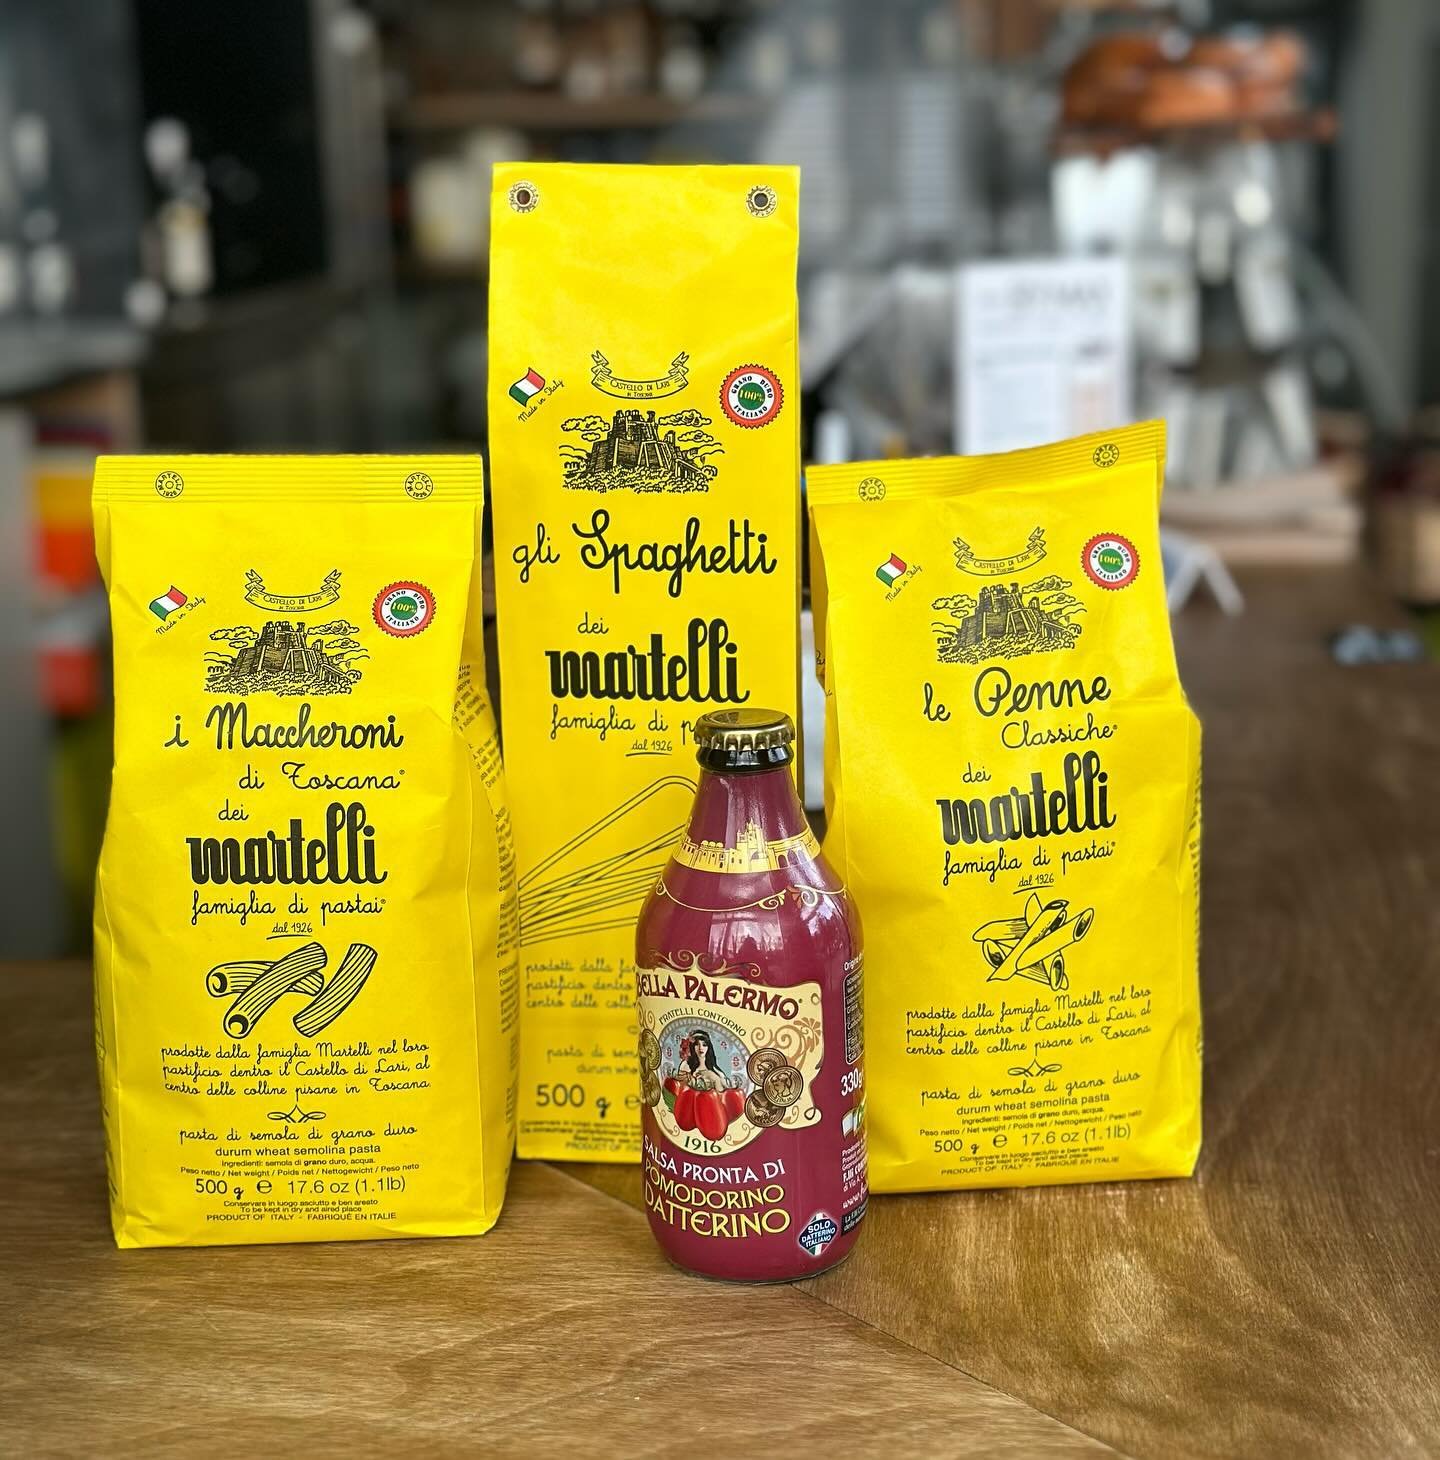 @pastamartelli pasta that doesn&rsquo;t need ridges to hold the sauce! Try with just butter and Parmesan to taste the difference 👌 #bestquality #craftmanship #realpasta